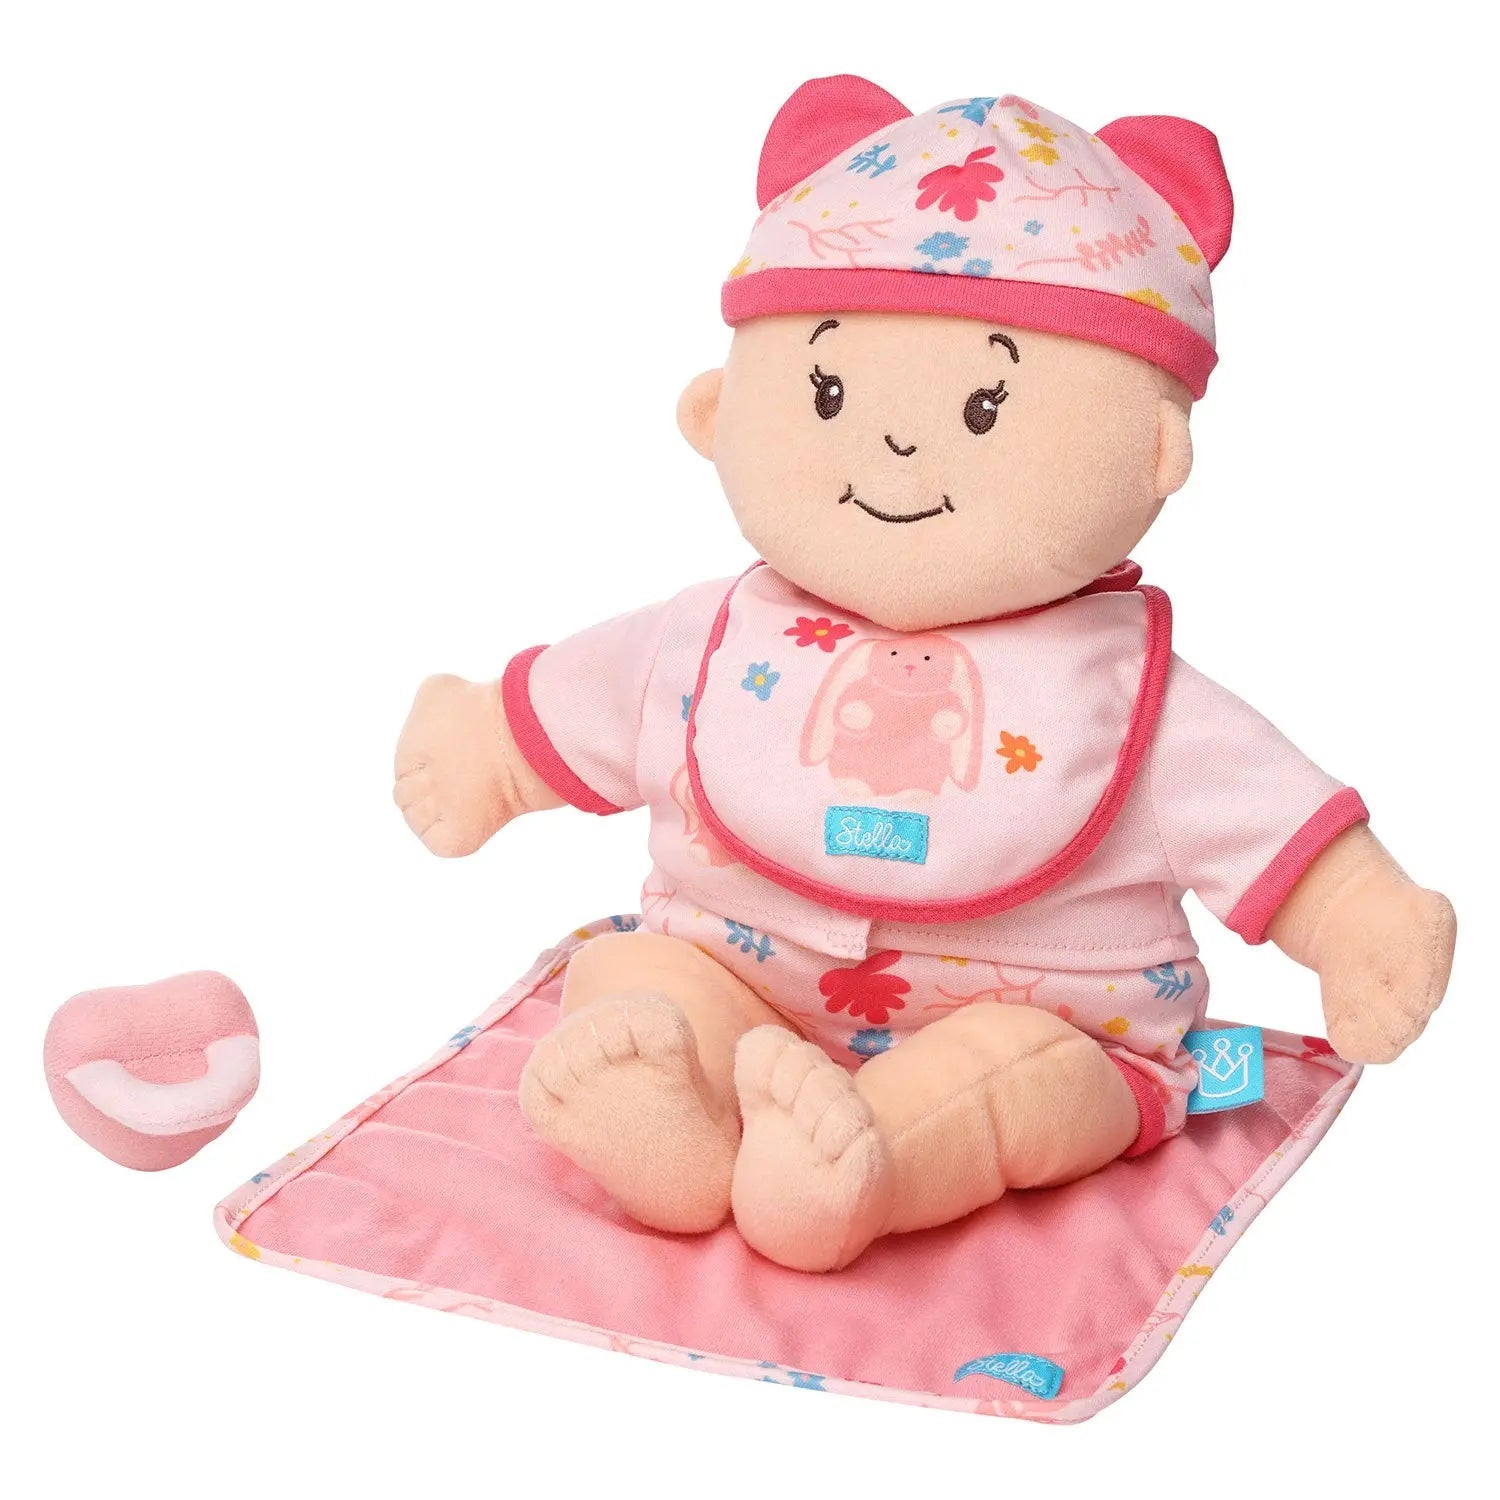 Baby Stella Welcome Baby Accessory Set - Lulie